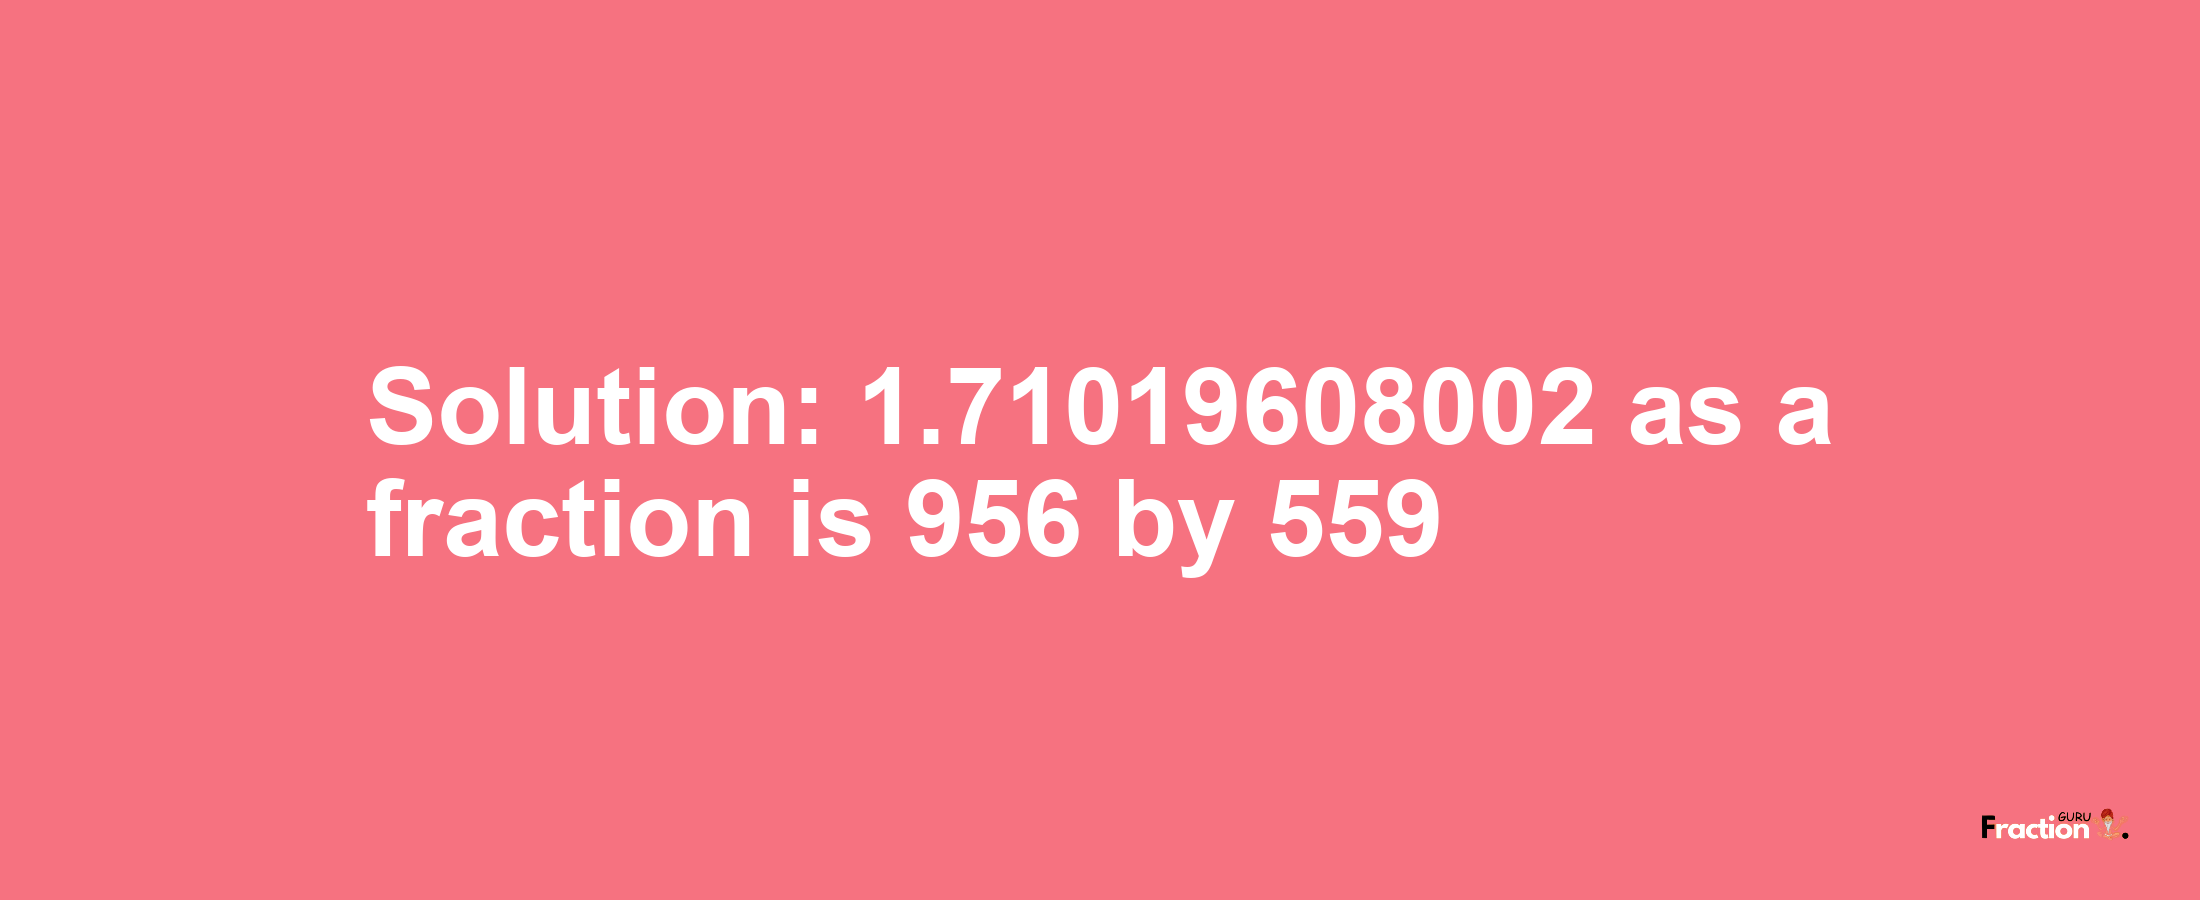 Solution:1.71019608002 as a fraction is 956/559